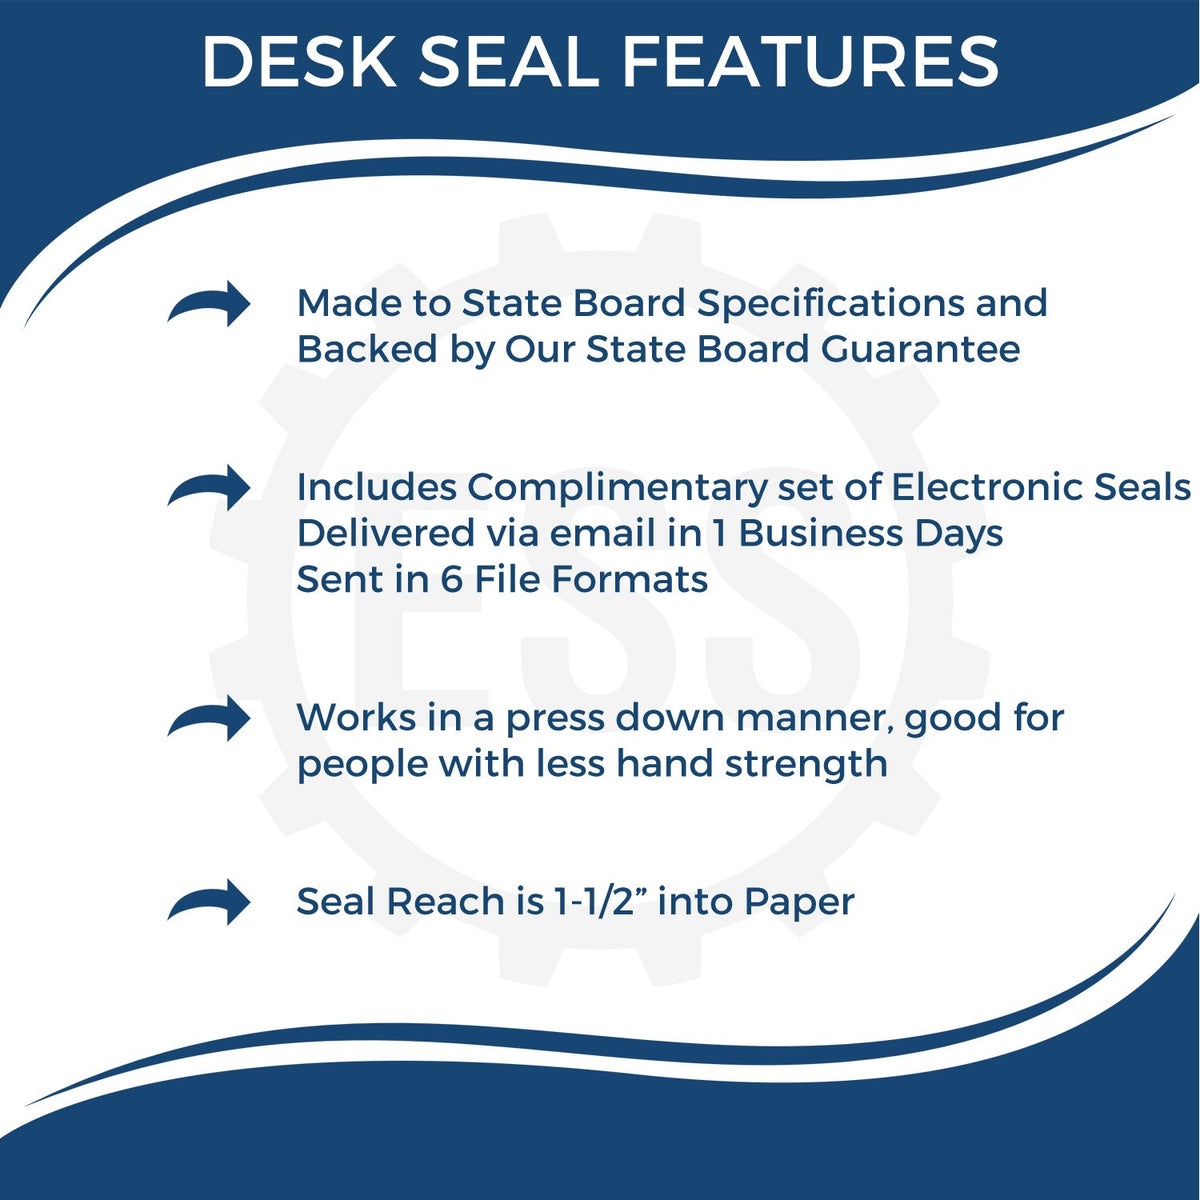 A picture of an infographic highlighting the selling points for the Montana Engineer Desk Seal